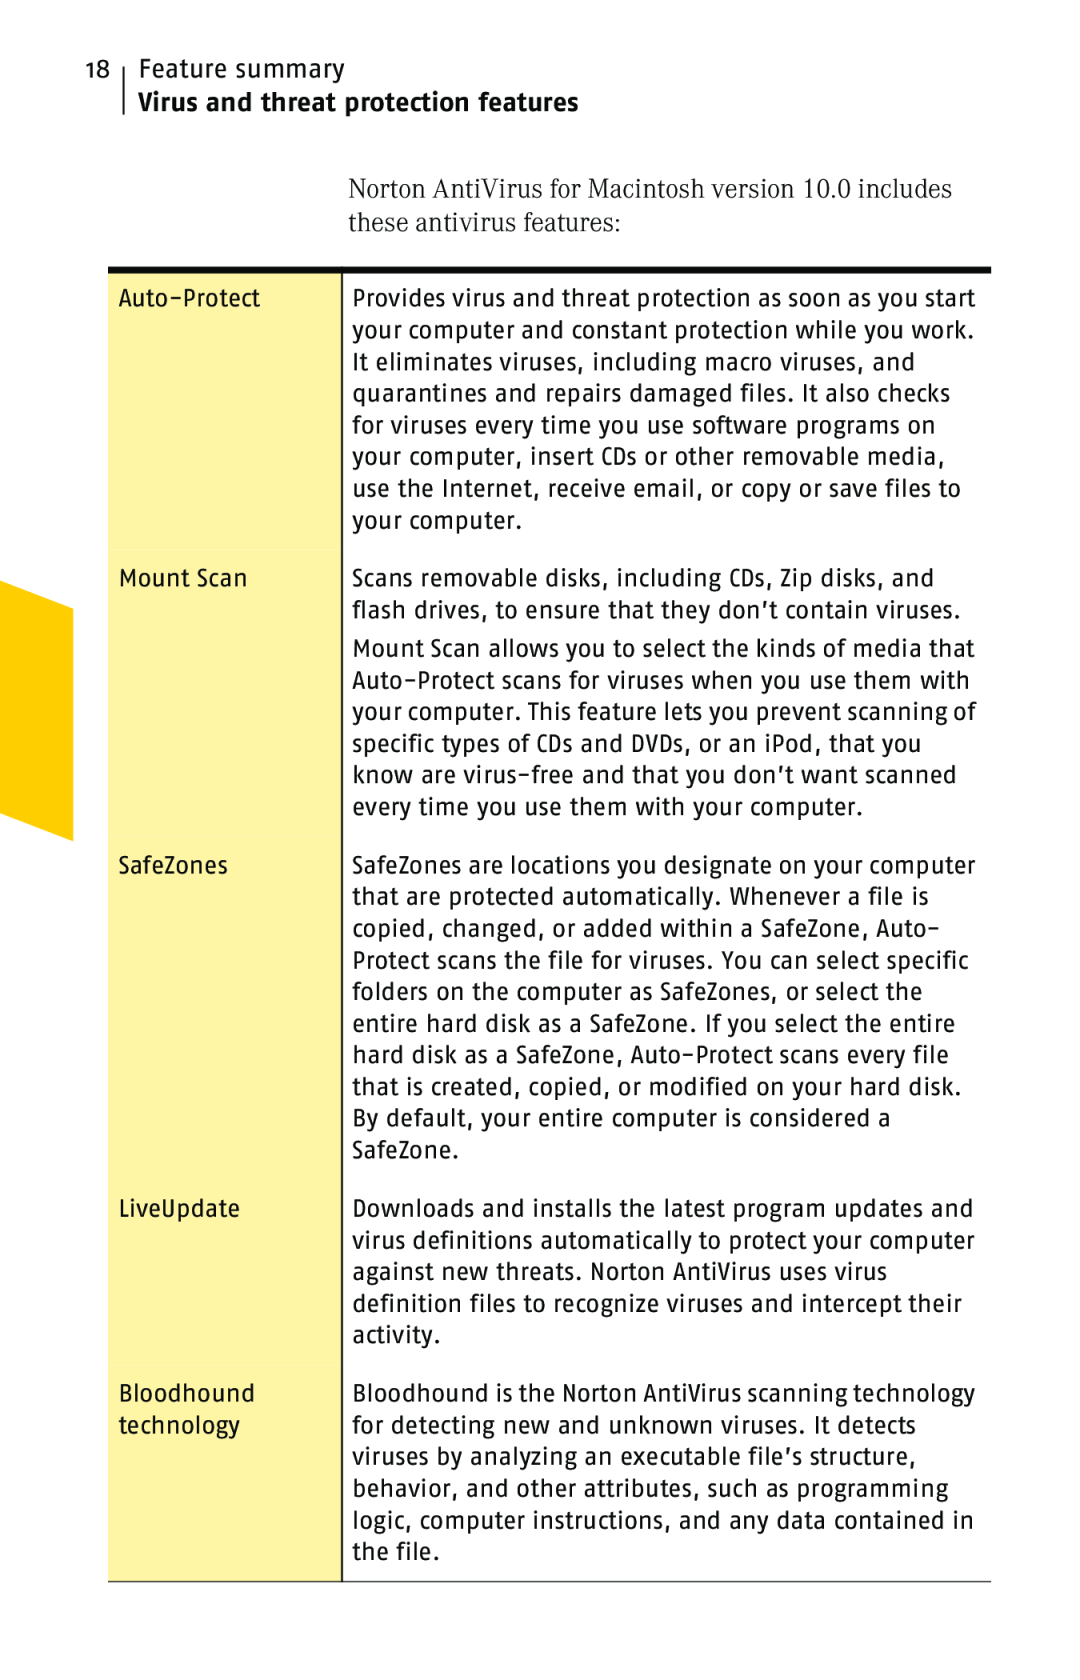 Symantec 10 manual 18Feature summary, Virus and threat protection features, these antivirus features 